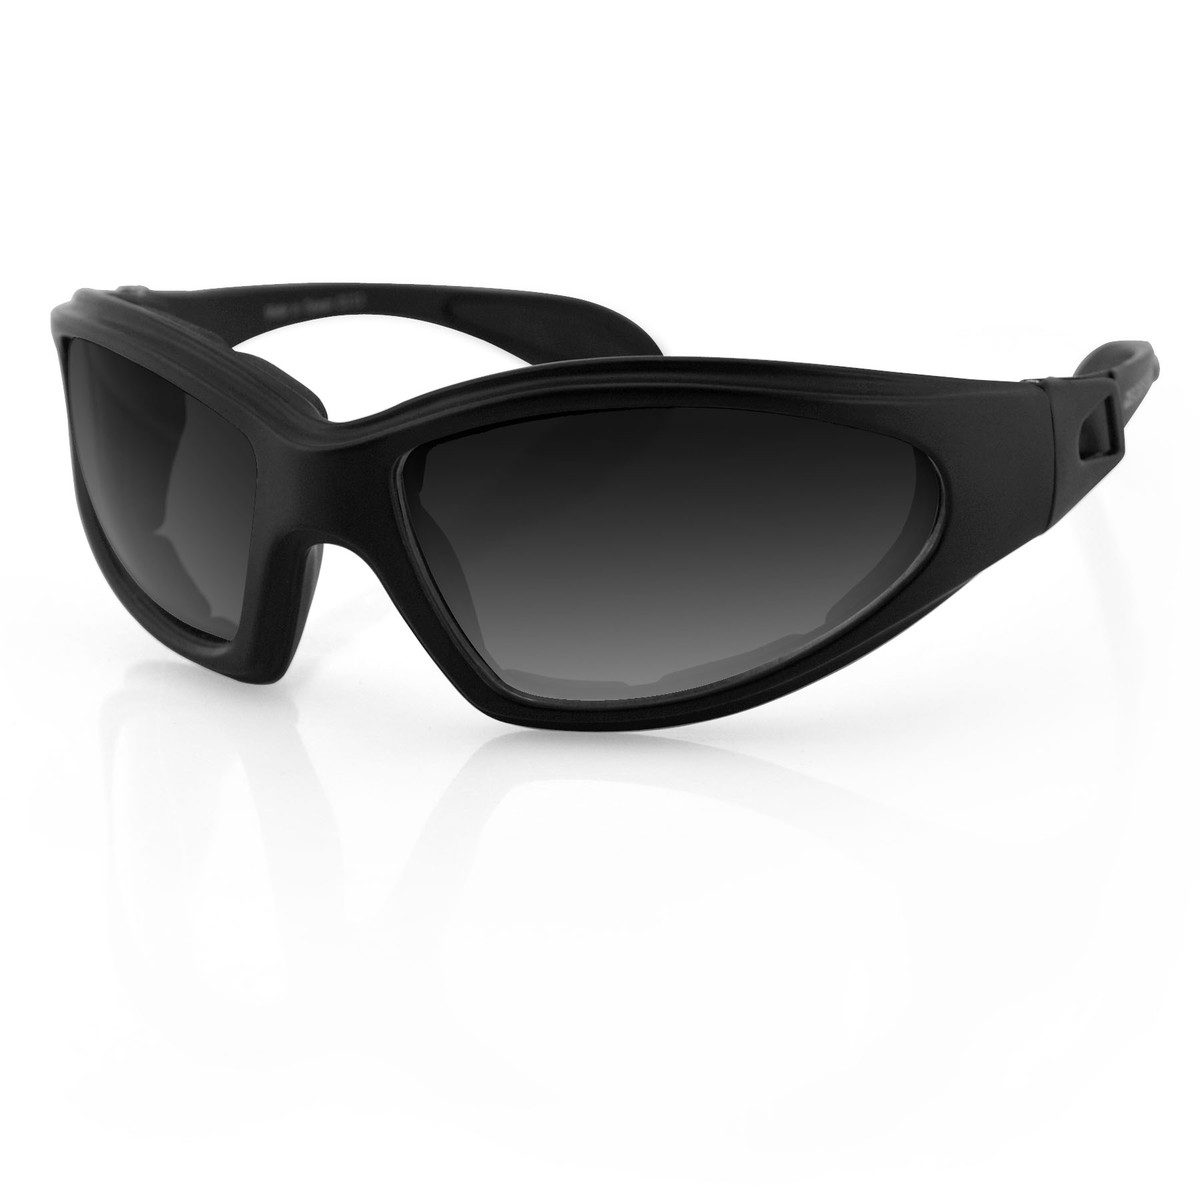 Bobster GXR Shatter Resistant Sunglasses that Float – Smoked -